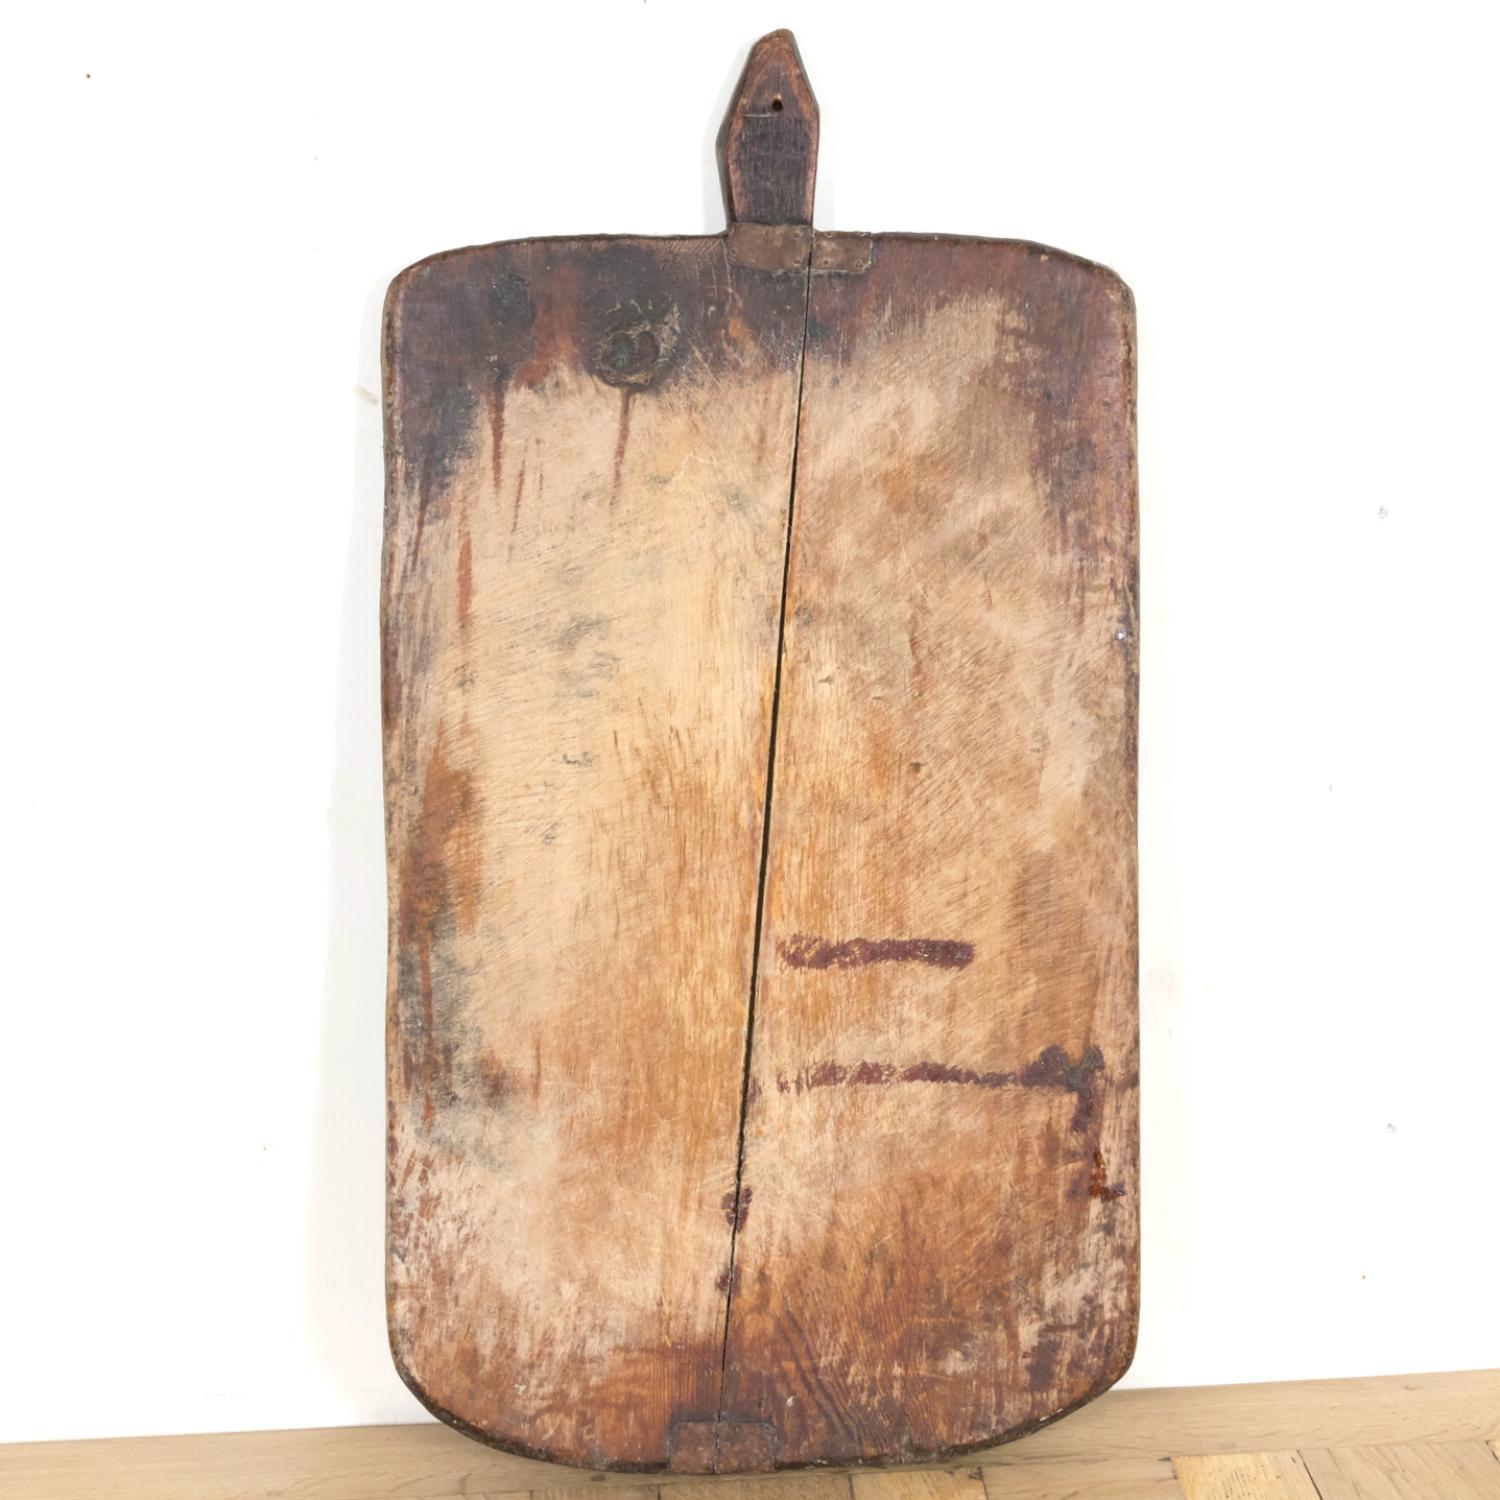 A large 19th century antique French Country cutting board or chopping board, circa 1870s, having a timeworn patina on both sides, showing knife marks and darkening that happens only after decades of use. This beautiful antique board has horizontal